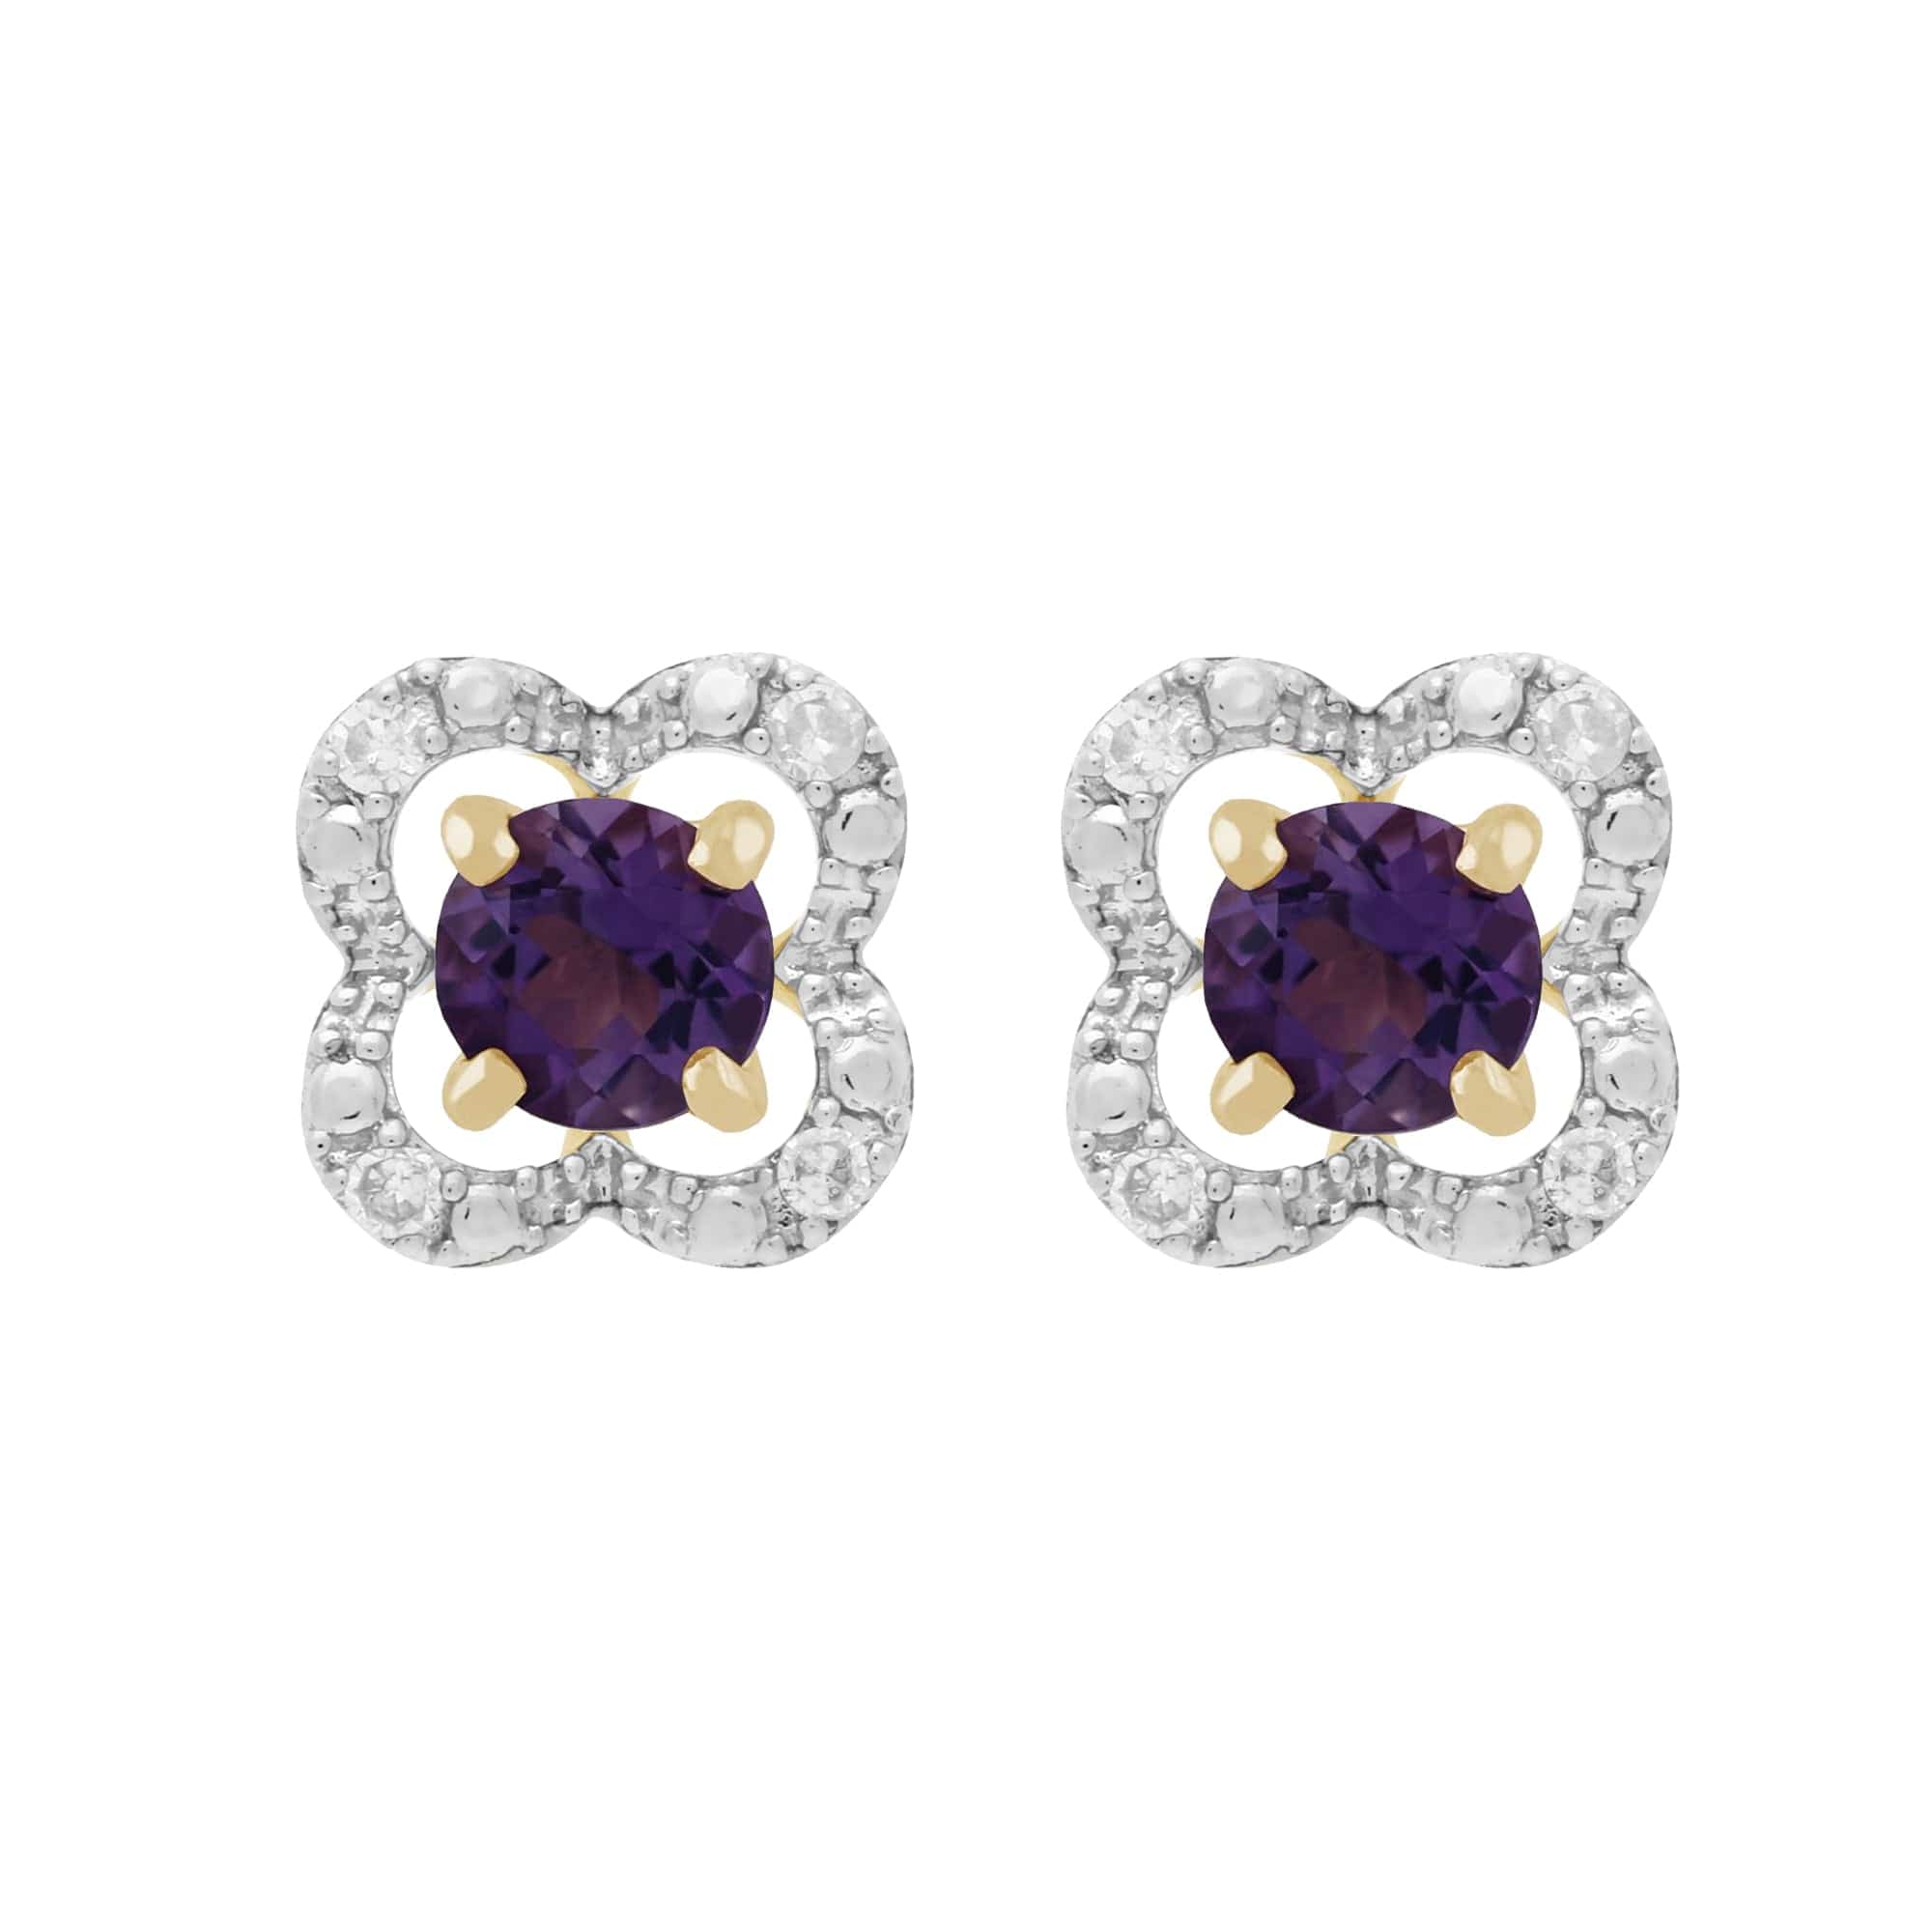 11560-191E0375019 Classic Round Amethyst Stud Earrings with Detachable Diamond Floral Ear Jacket in 9ct Yellow Gold 1